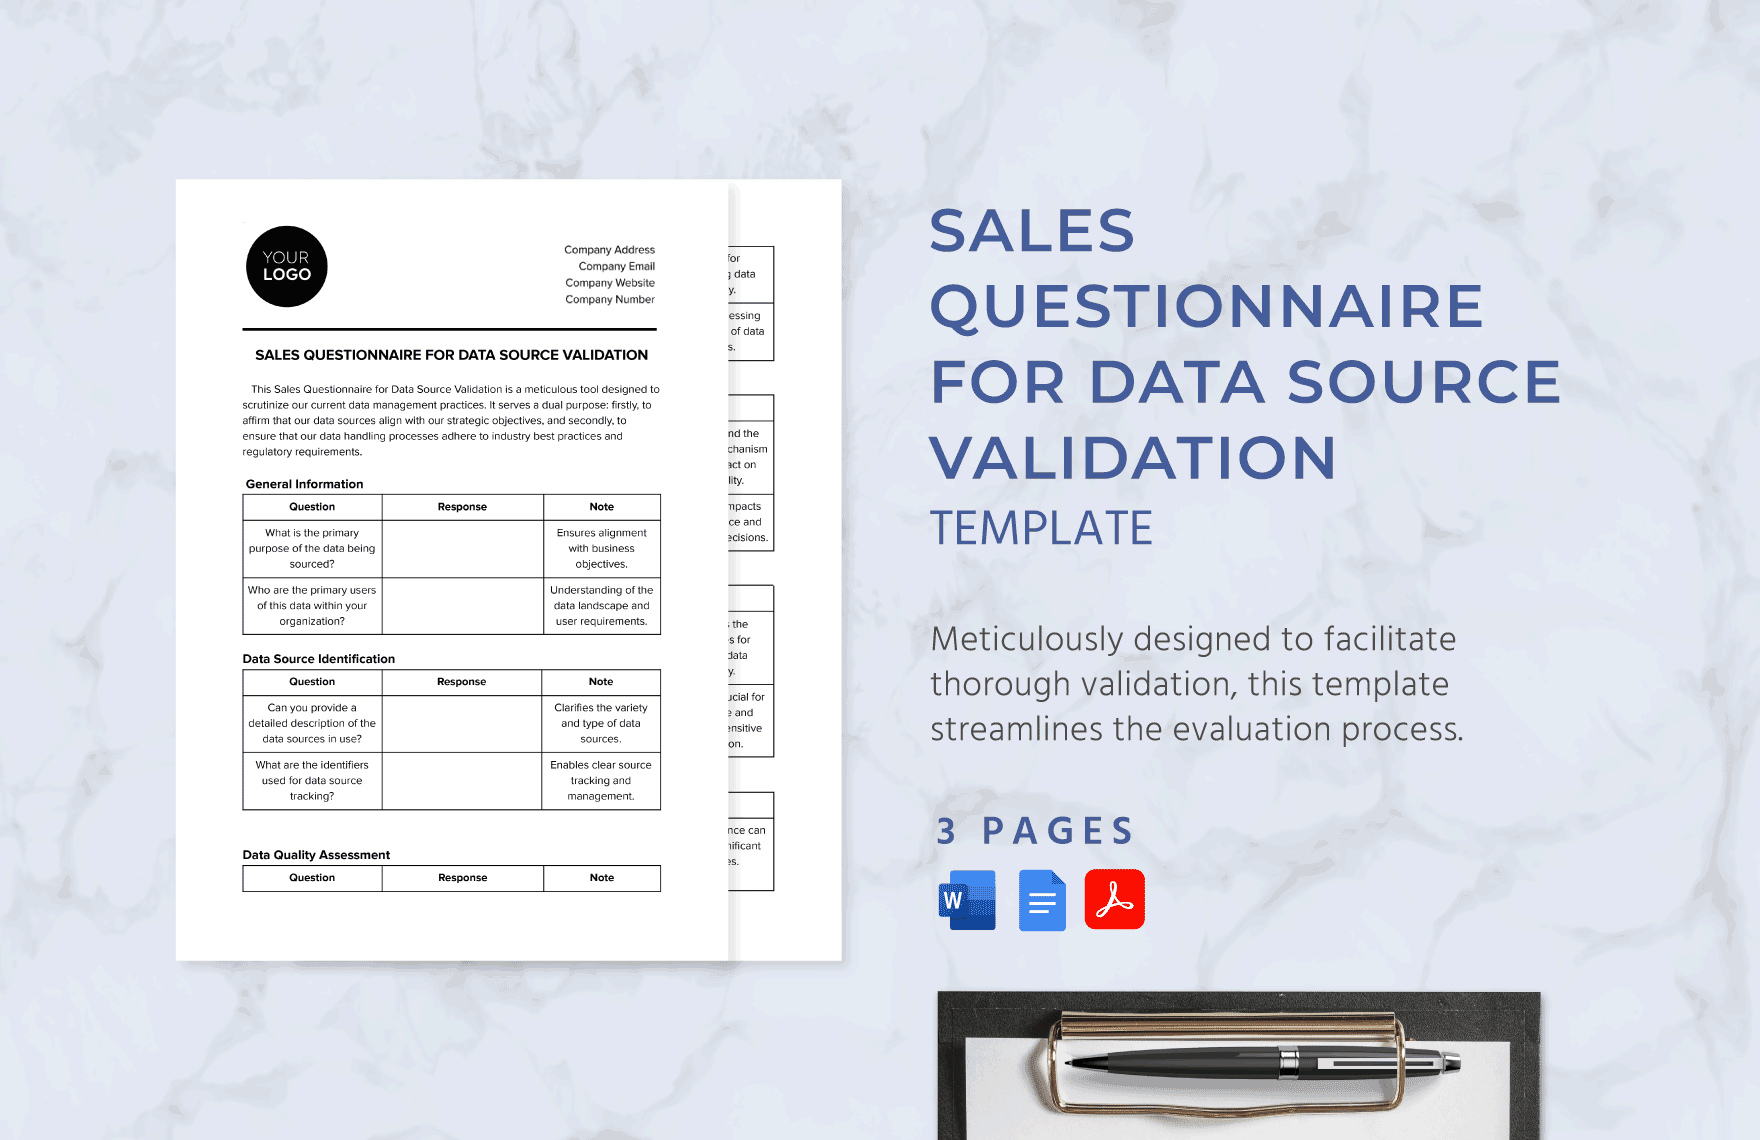 Sales Questionnaire for Data Source Validation Template